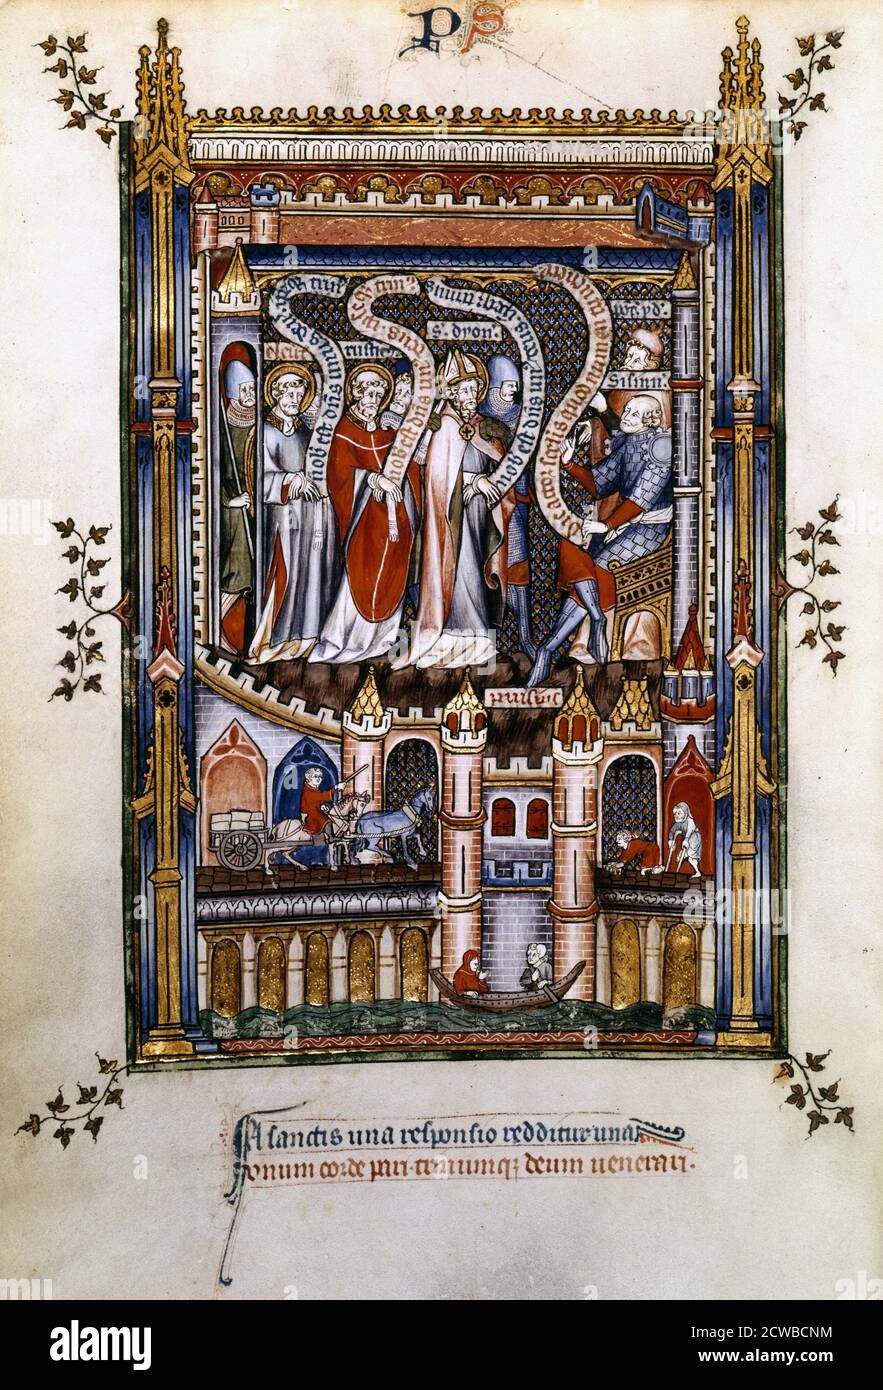 St Denis, St Rusticus and St Eleutherius before Sisinnius, attended by the High Priest, 1317. Manuscript illustration from a work on the life of St Denis (died c258 AD), written by Yves, a monk at the Abbey of St Denis. The book depicts the torture and martyrdom of the saint by the Roman governor Fescenninus Sisinnius. From the collection of the Bibliotheque Nationale, Paris, the artist is unknown. Stock Photo